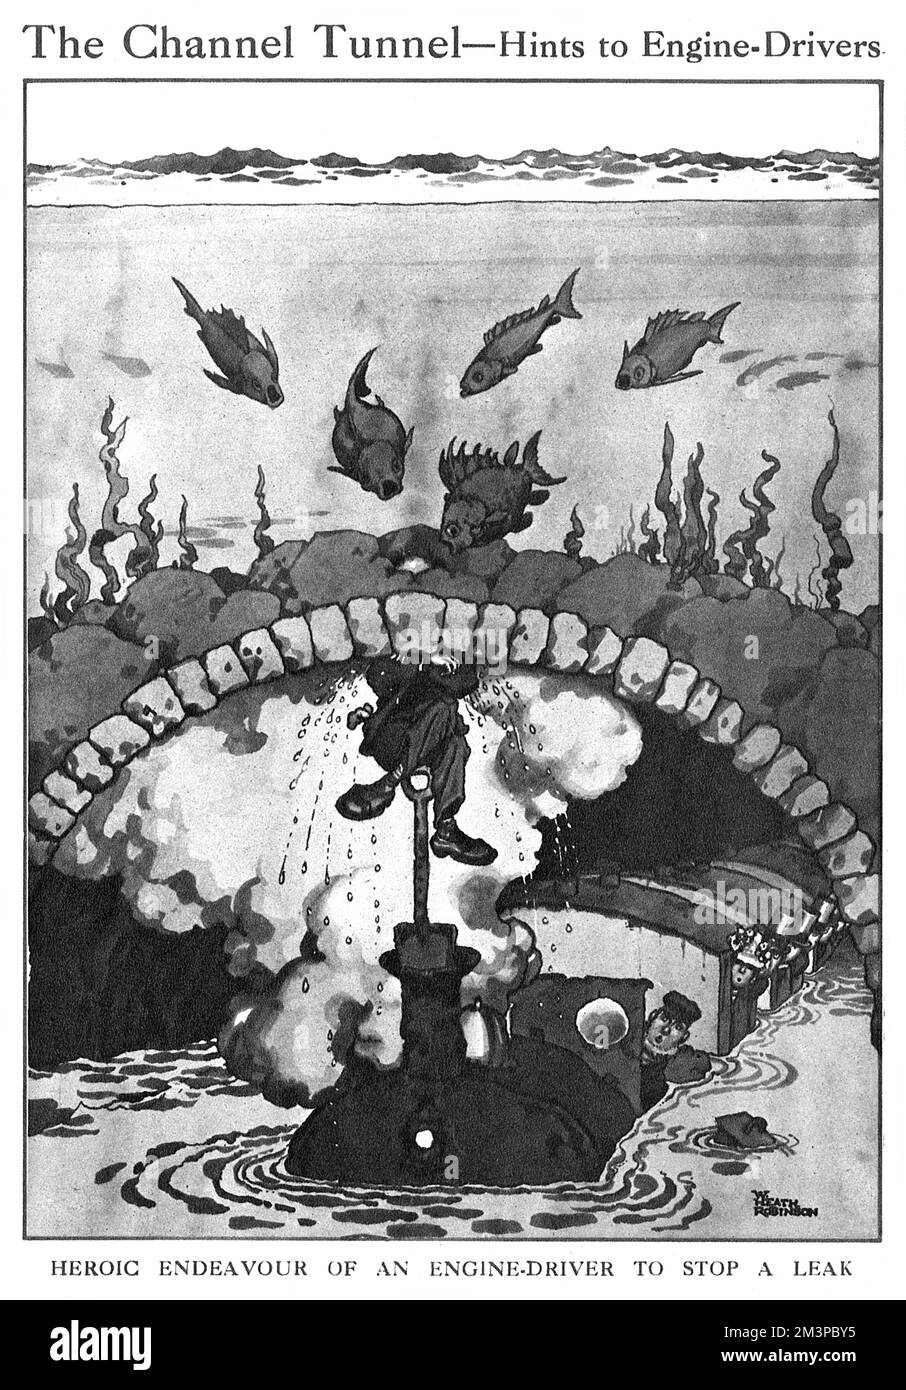 Heroic endeavour of an engine-driver to stop a leak.  An engine driver sticks his head in a hole threatening to flood the Channel Tunnel - a humorous scenario envisaged by William Heath Robinson.      Date: 1919 Stock Photo